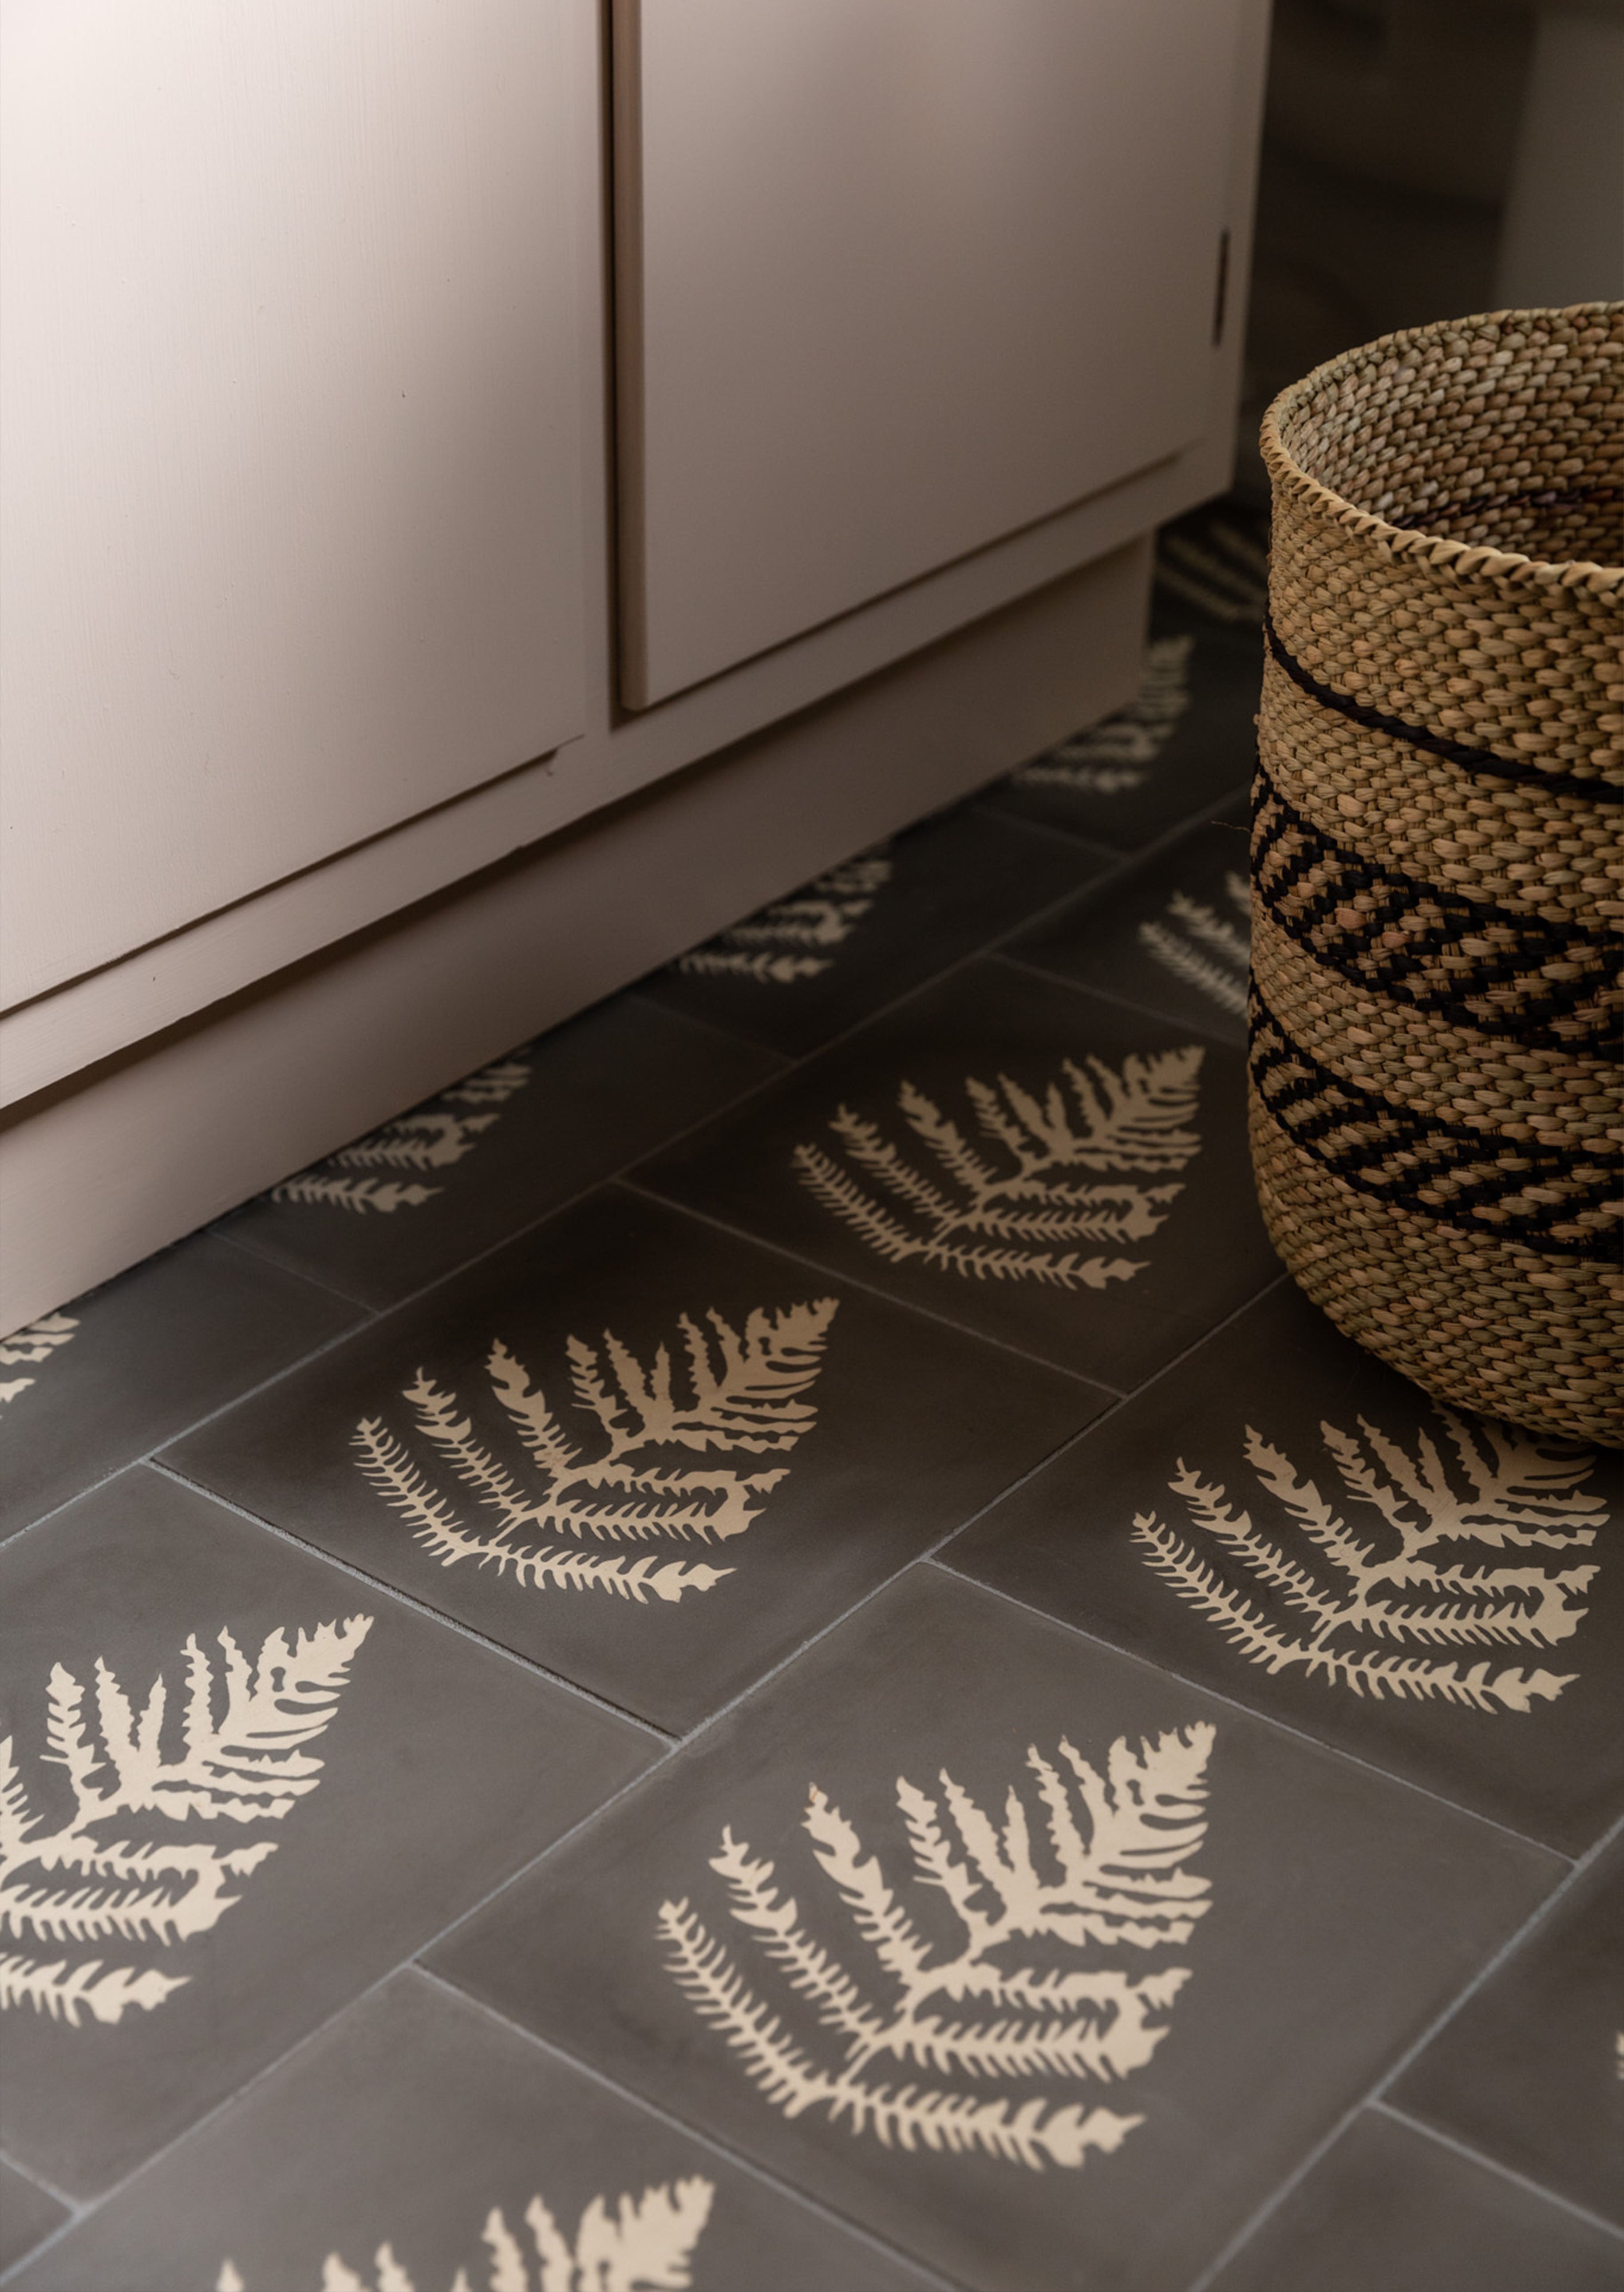 A floor with cement tiles with a fern design inspired by fashion designer erica tanov.